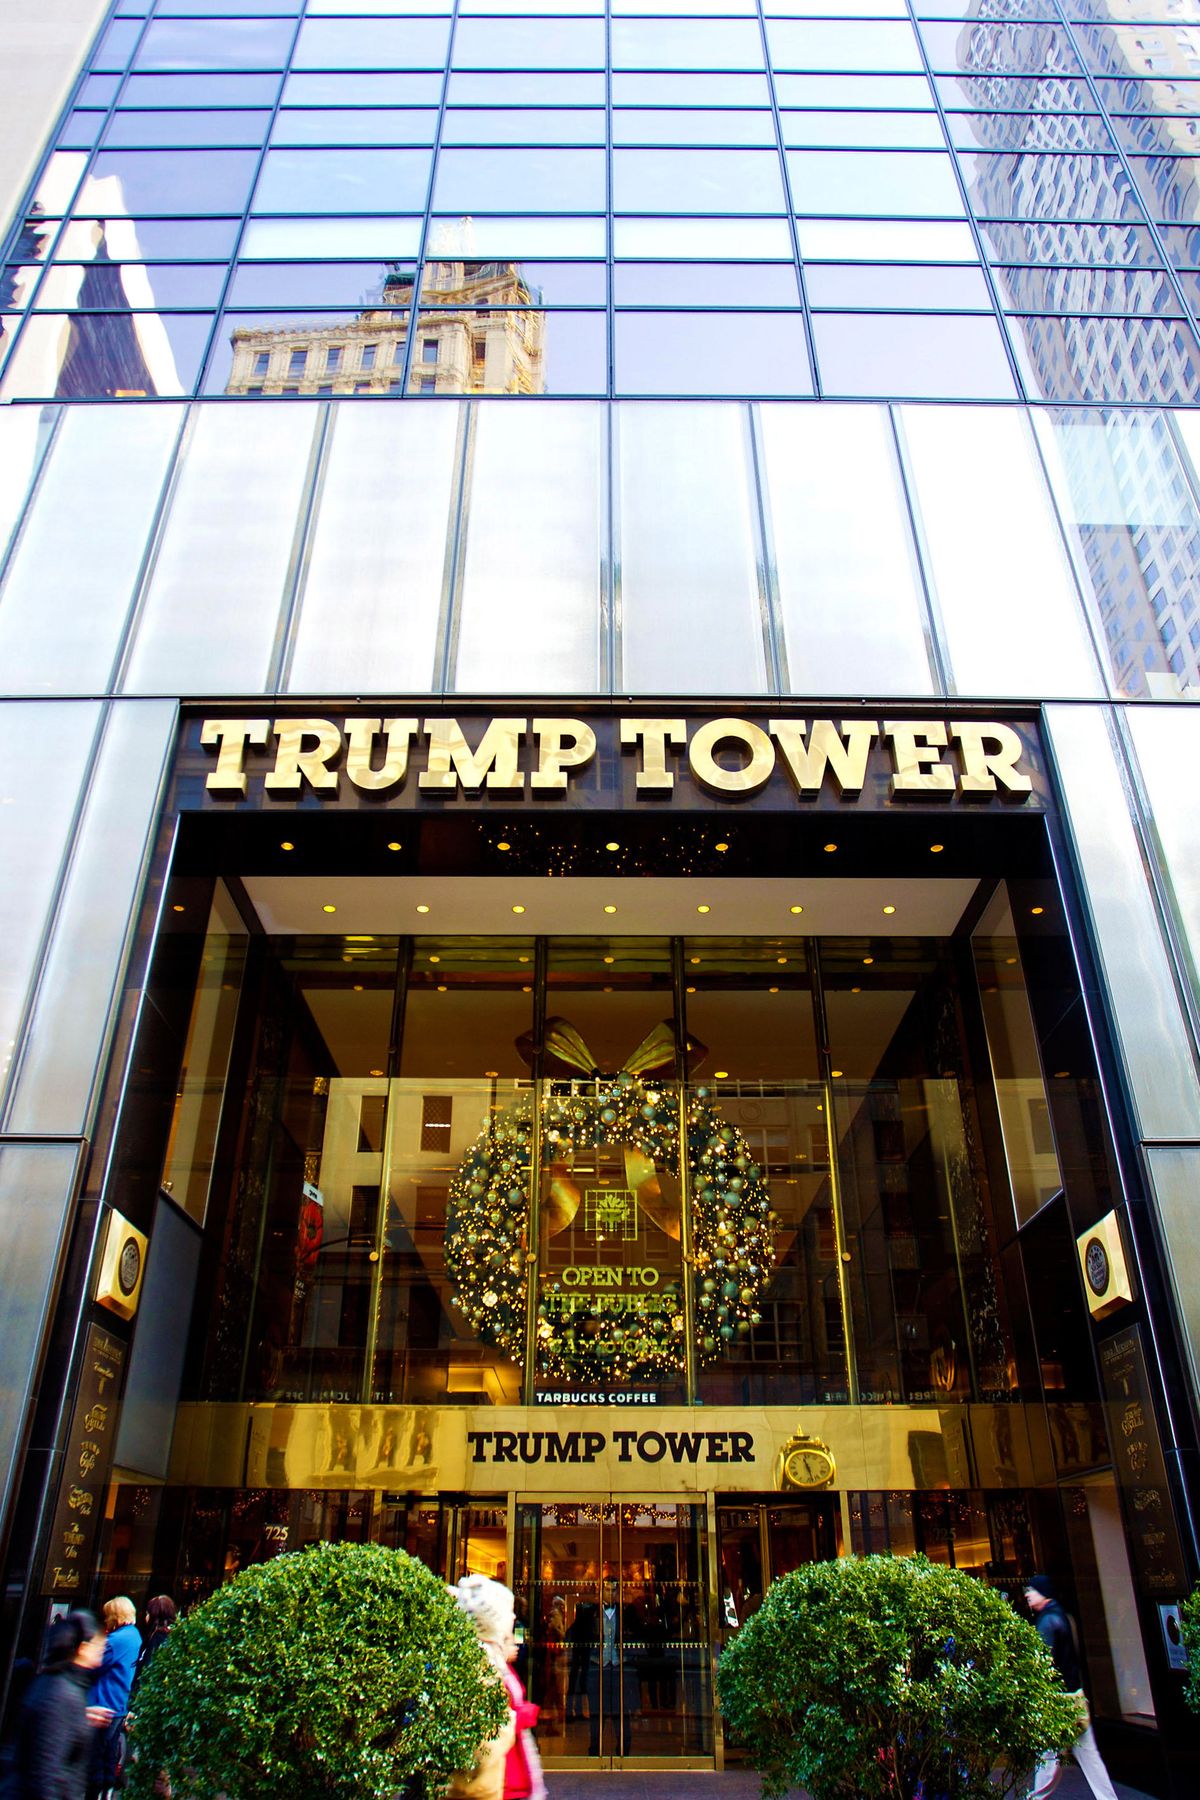 NEW YORK, NY - DECEMBER 13:  Trump Tower Holiday Decorations on December 13, 2012 in New York City.  (Photo by Steve Mack/S.D. Mack Pictures)